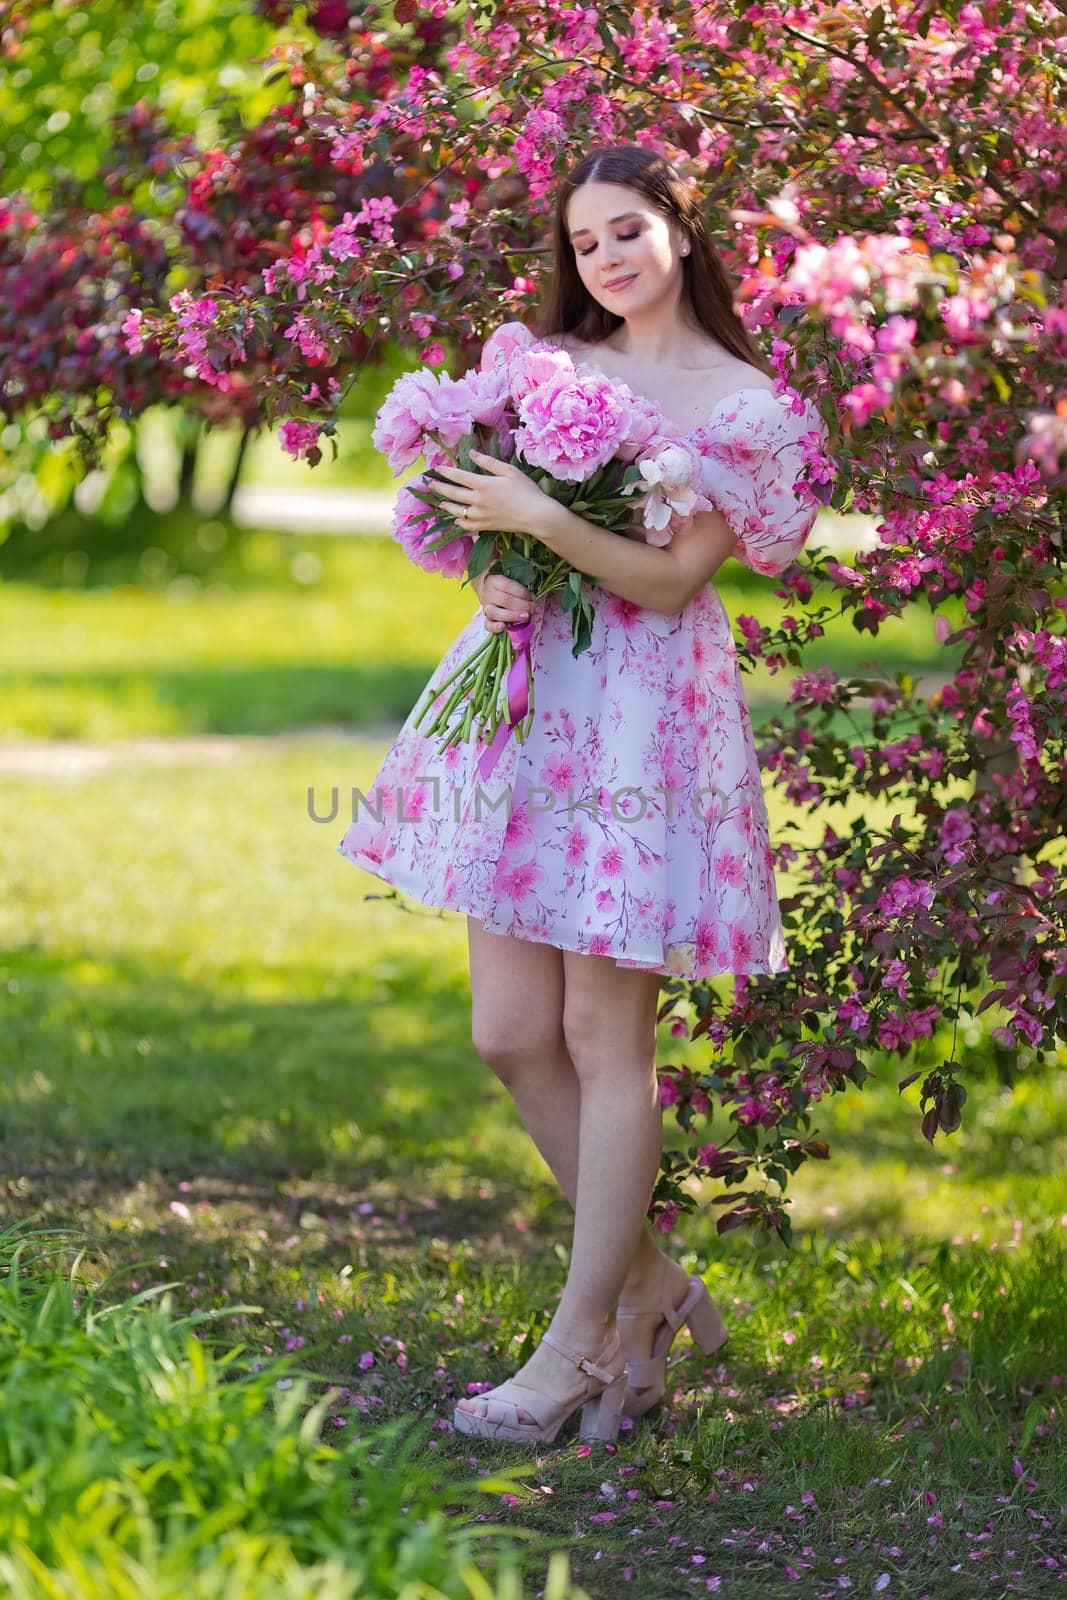 the girl, closed her eyes, stands with a large bouquet of peonies, by Zakharova